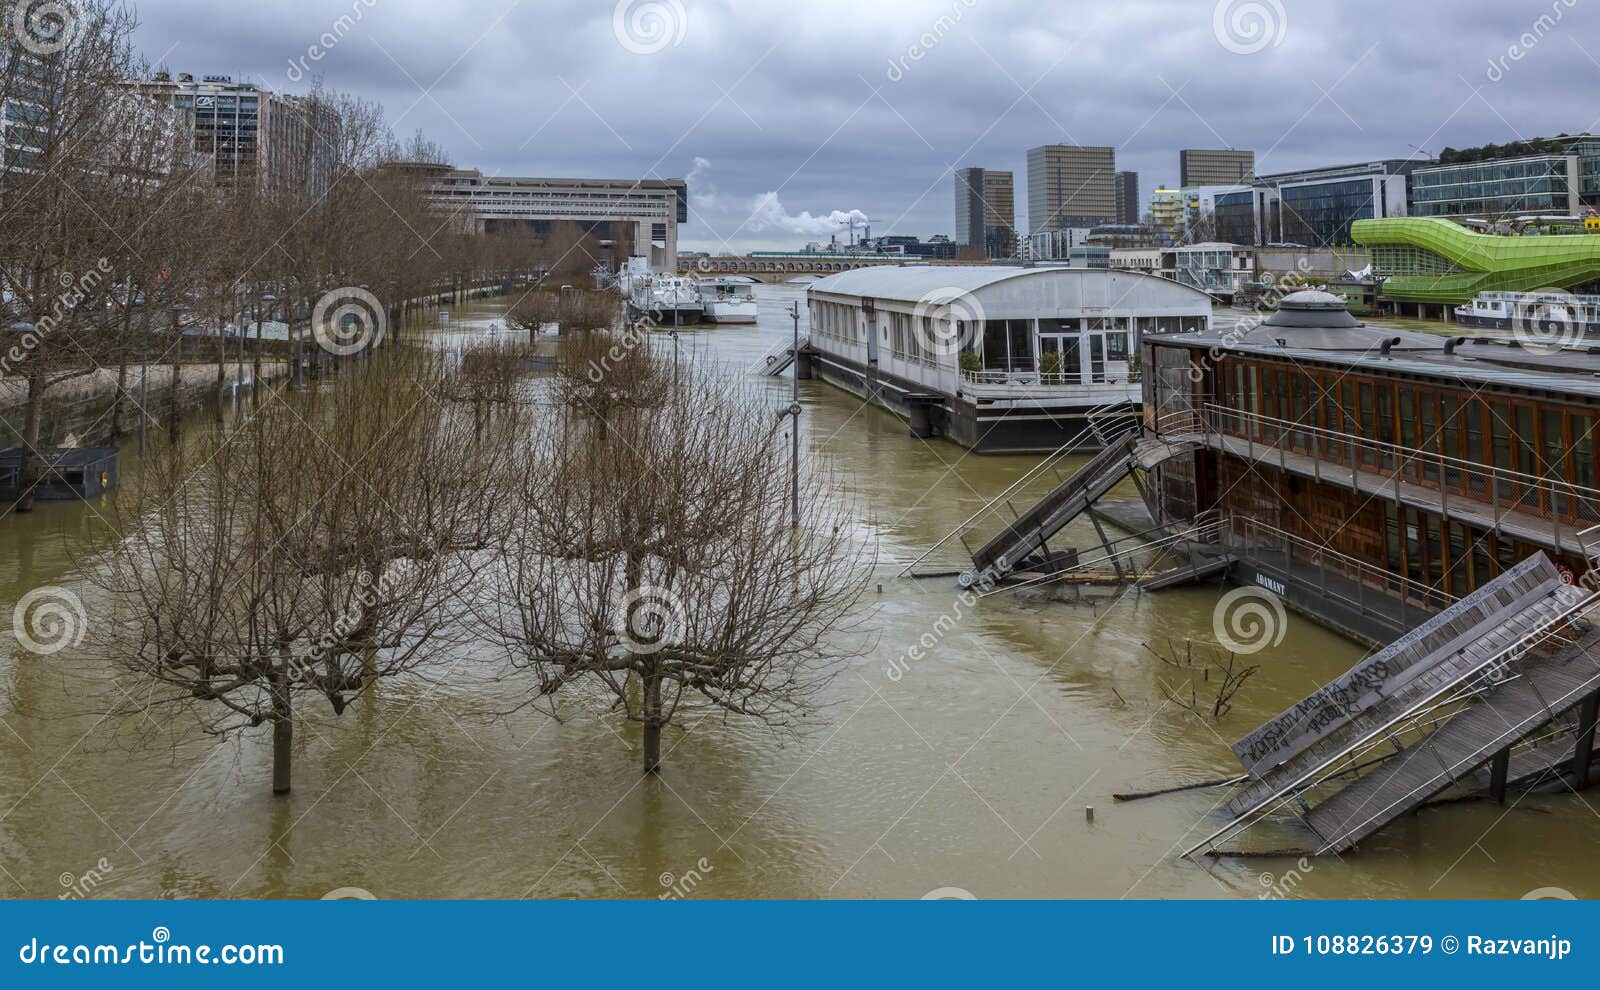 Flood in Paris editorial stock image. Image of environment - 108826379